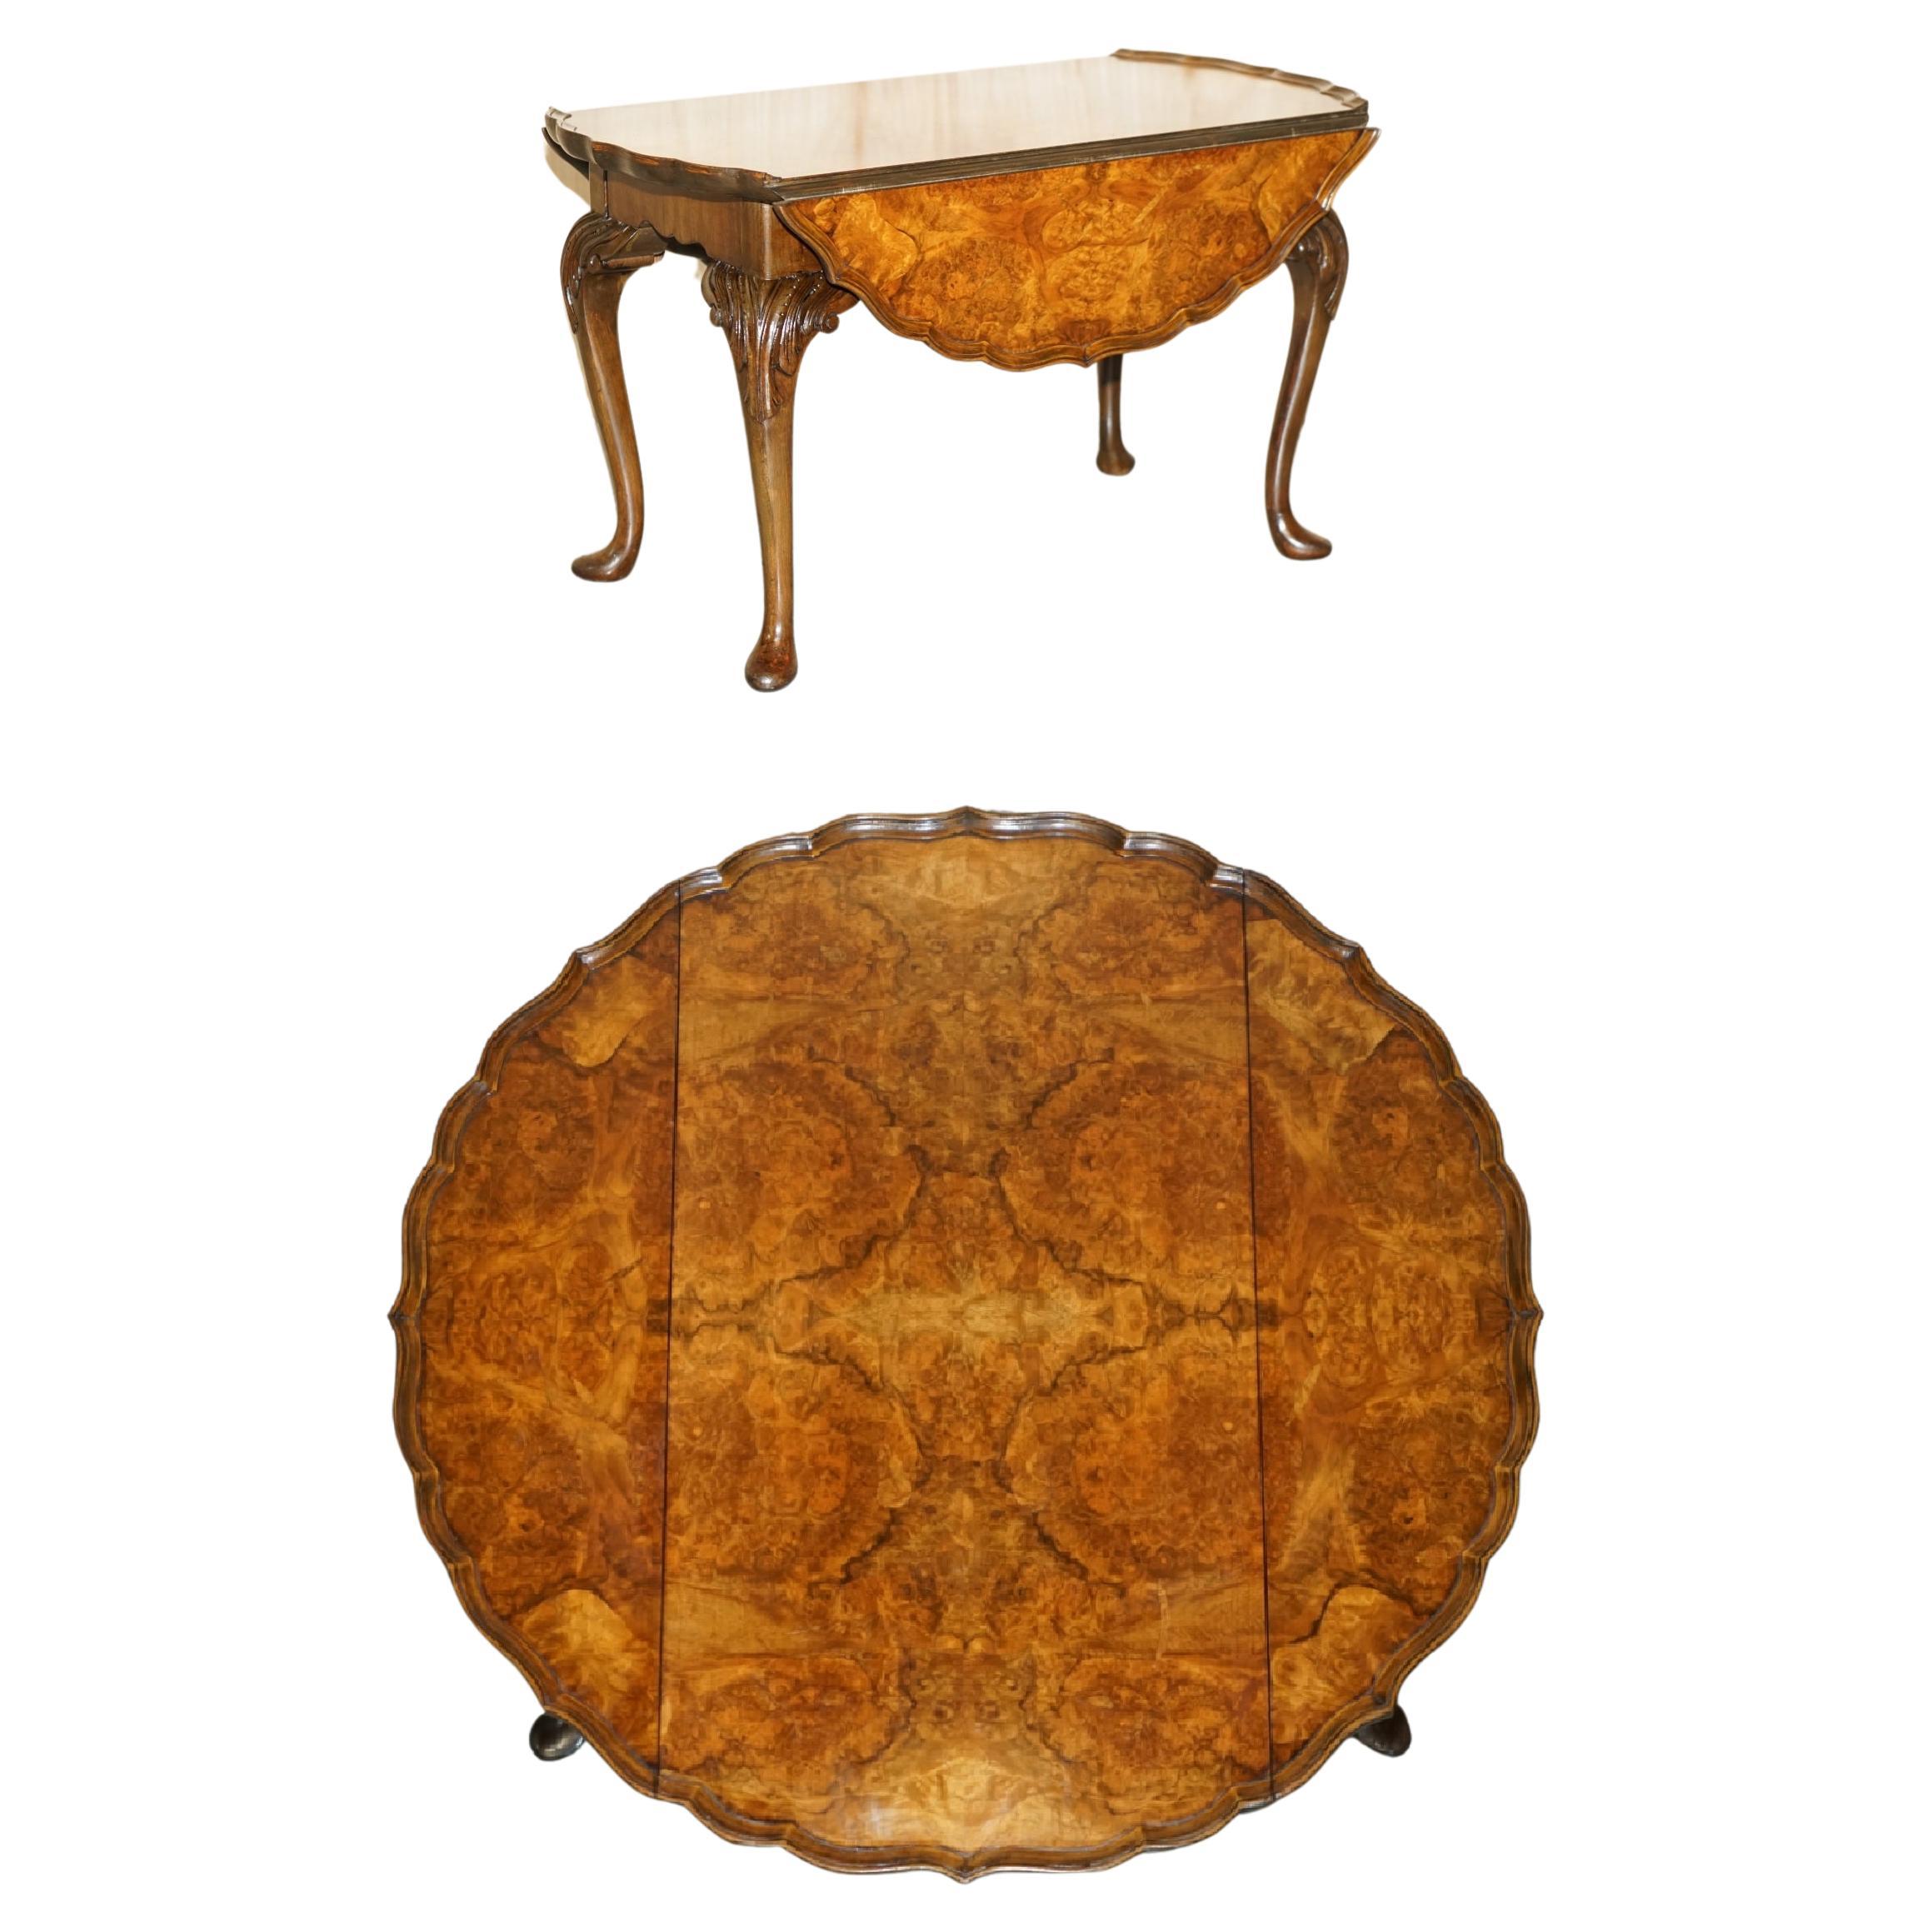 Stunning Hand Carved Burr Walnut Extending Coffee Cocktail Table Cabriole Legs